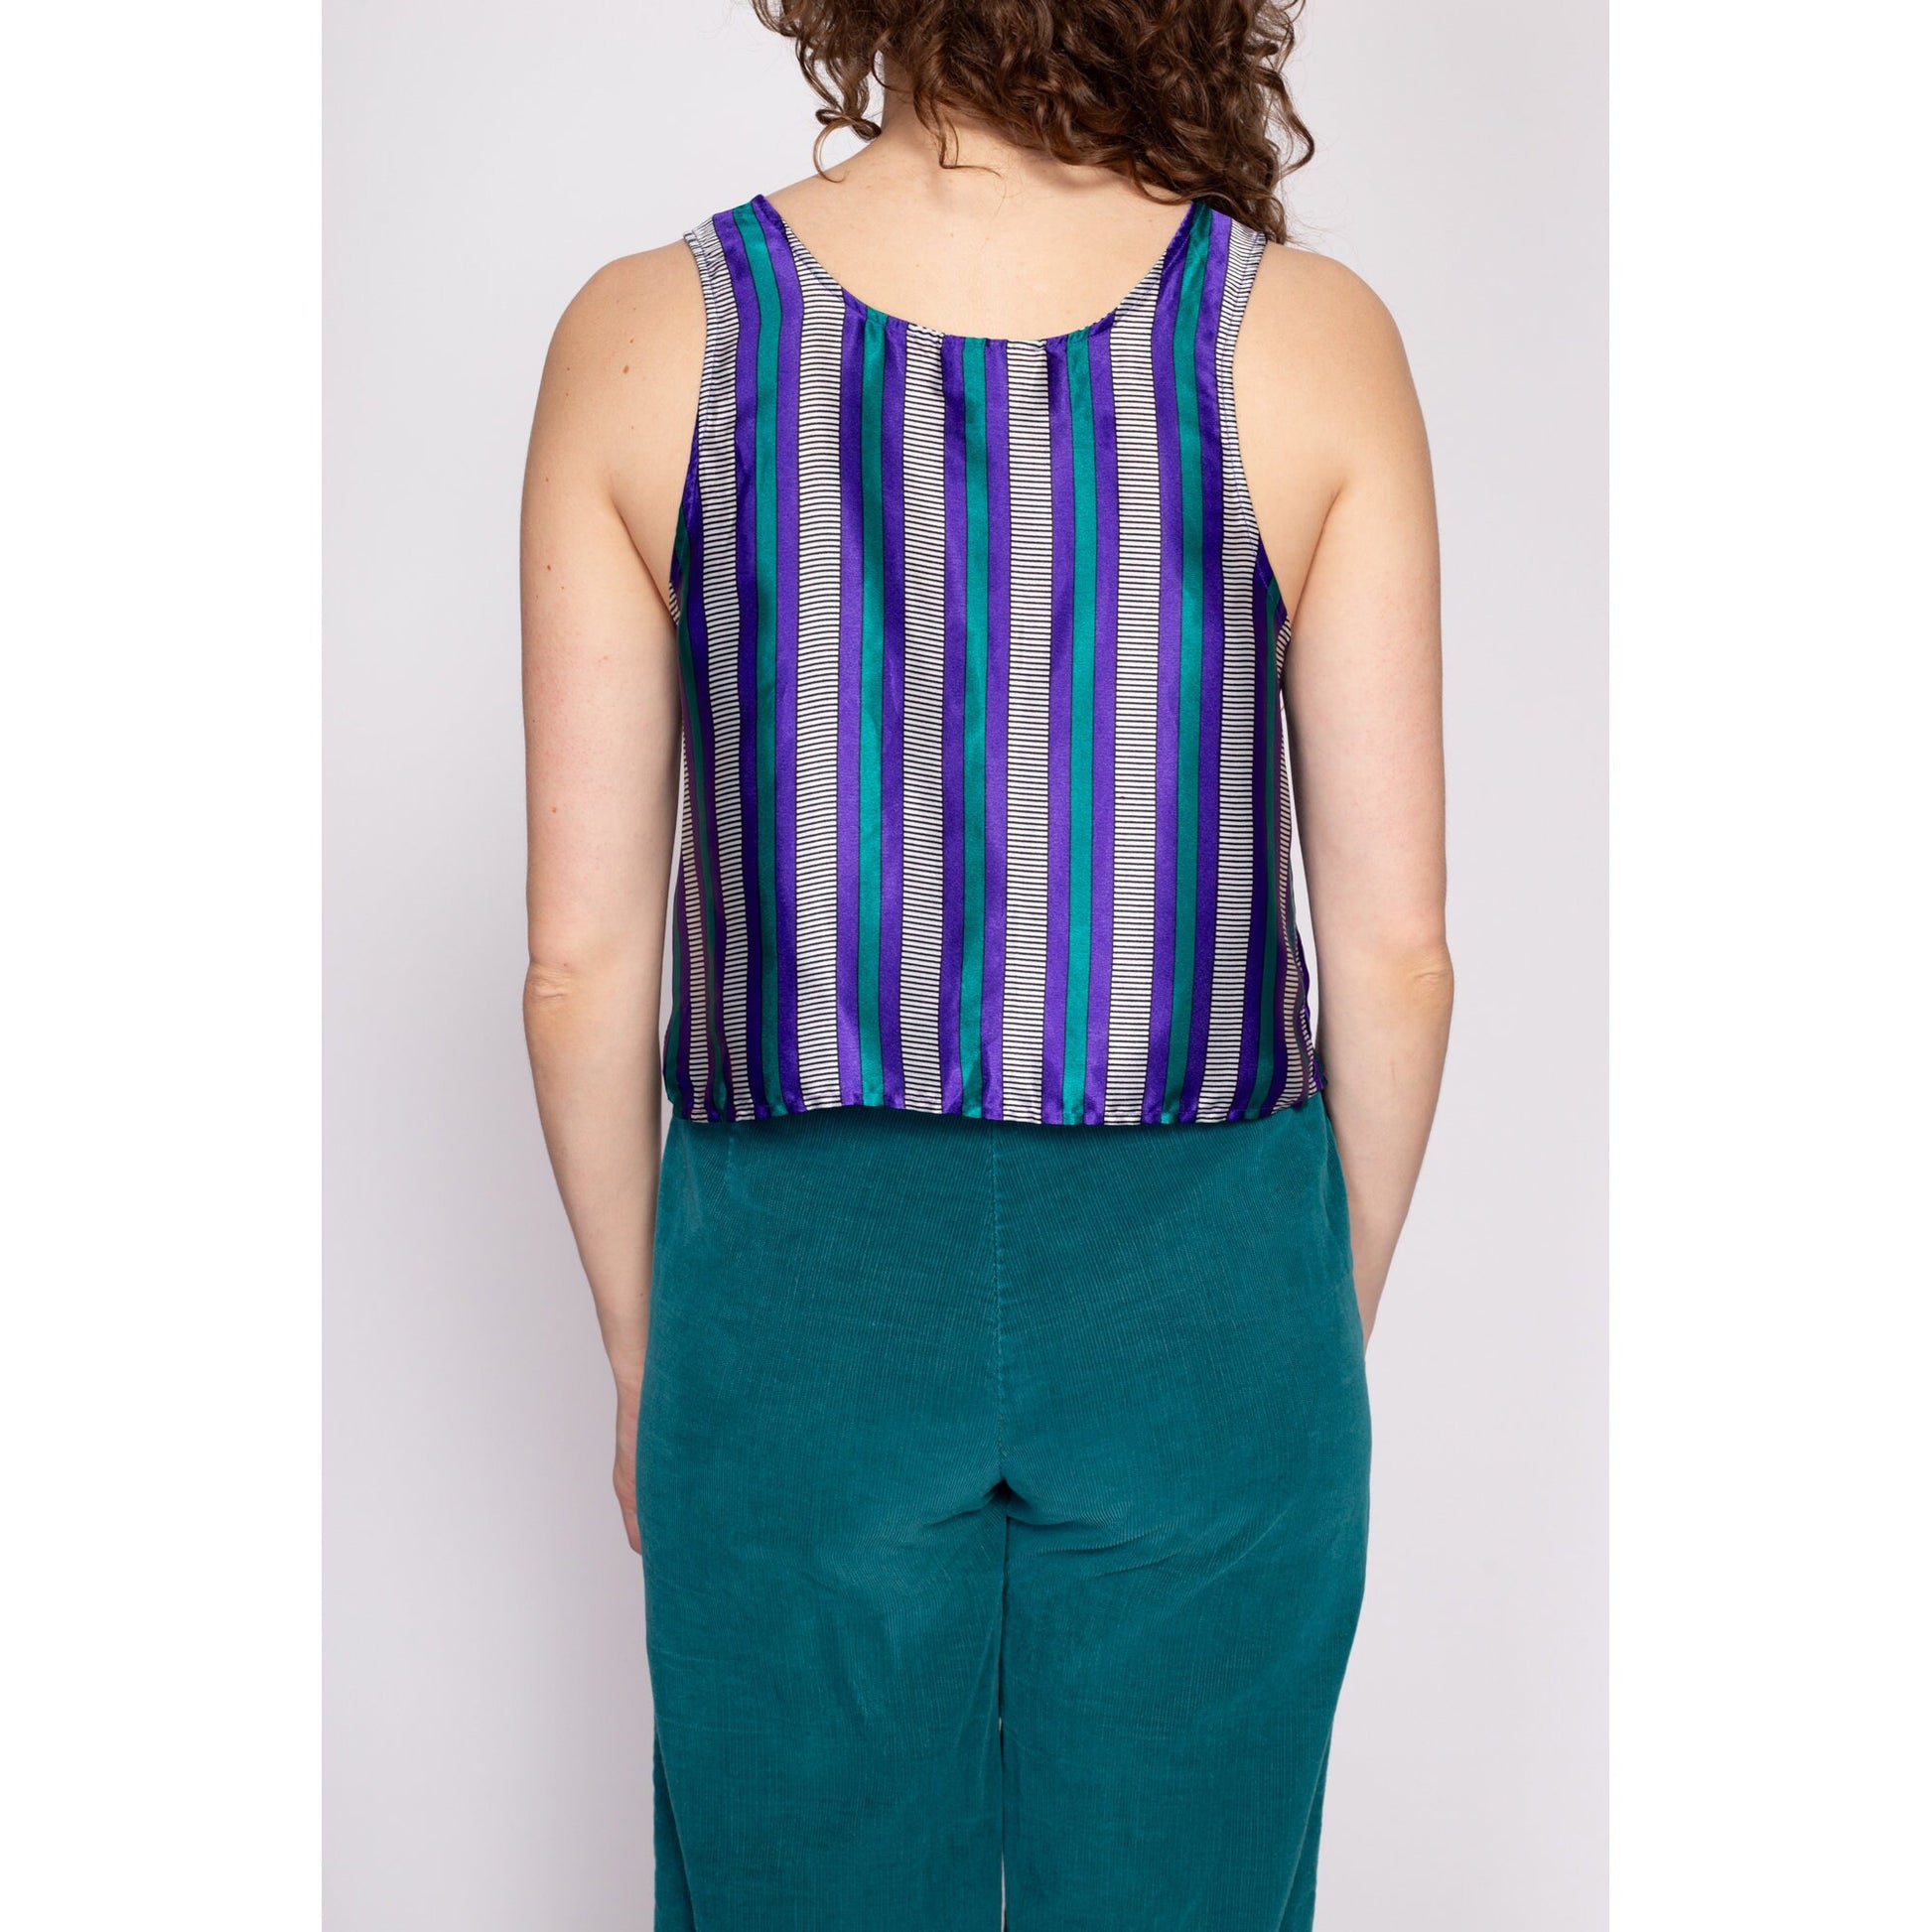 90s Purple & Teal Striped Satin Cropped Tank - Small | Vintage Victoria's Secret Sleeveless Crop Top